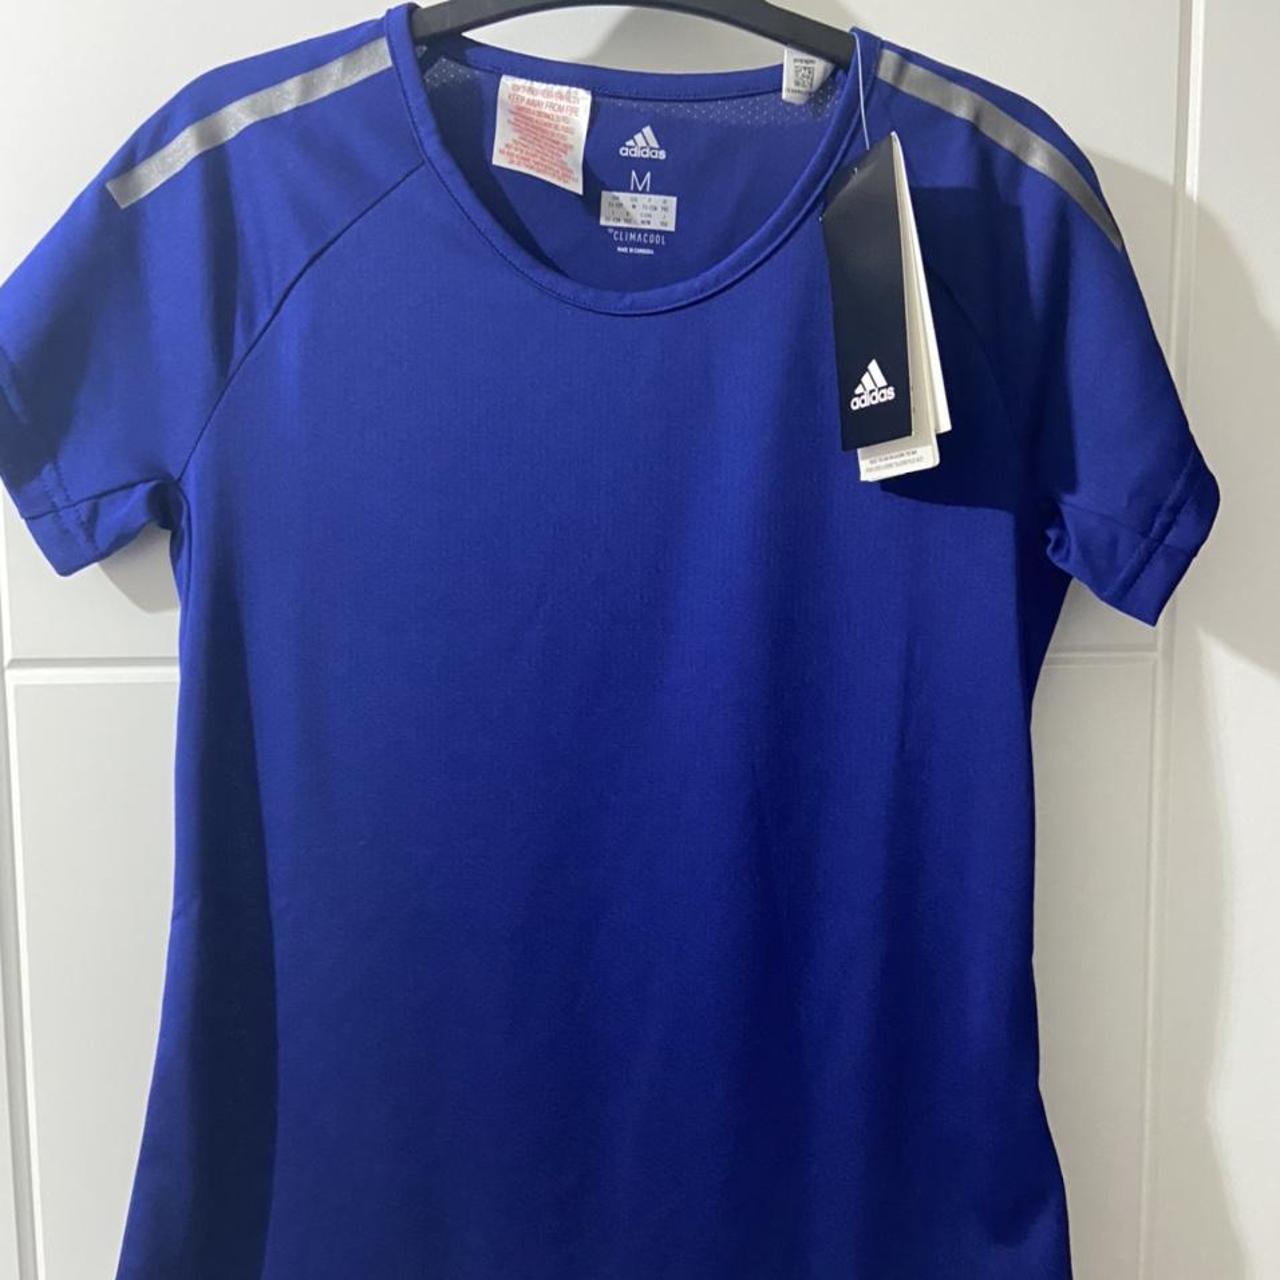 adidas climacool t shirt age 11-12 blue with glow in... - Depop